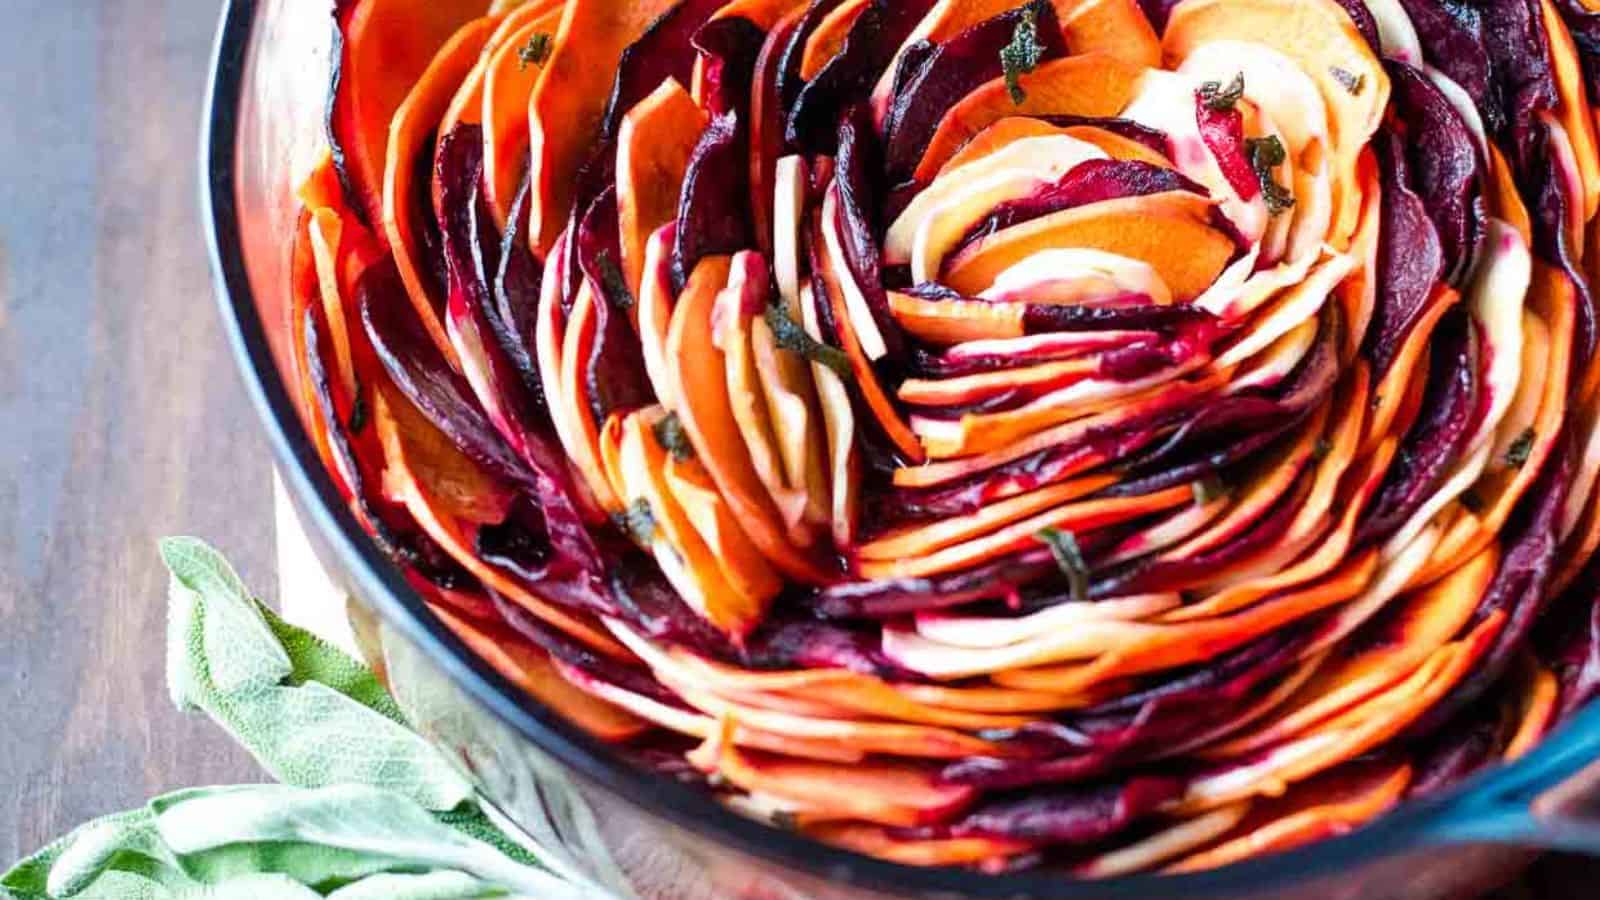 A dish of beets, sweet potatoes, and parsnips roasted in the oven with sprigs of sage.